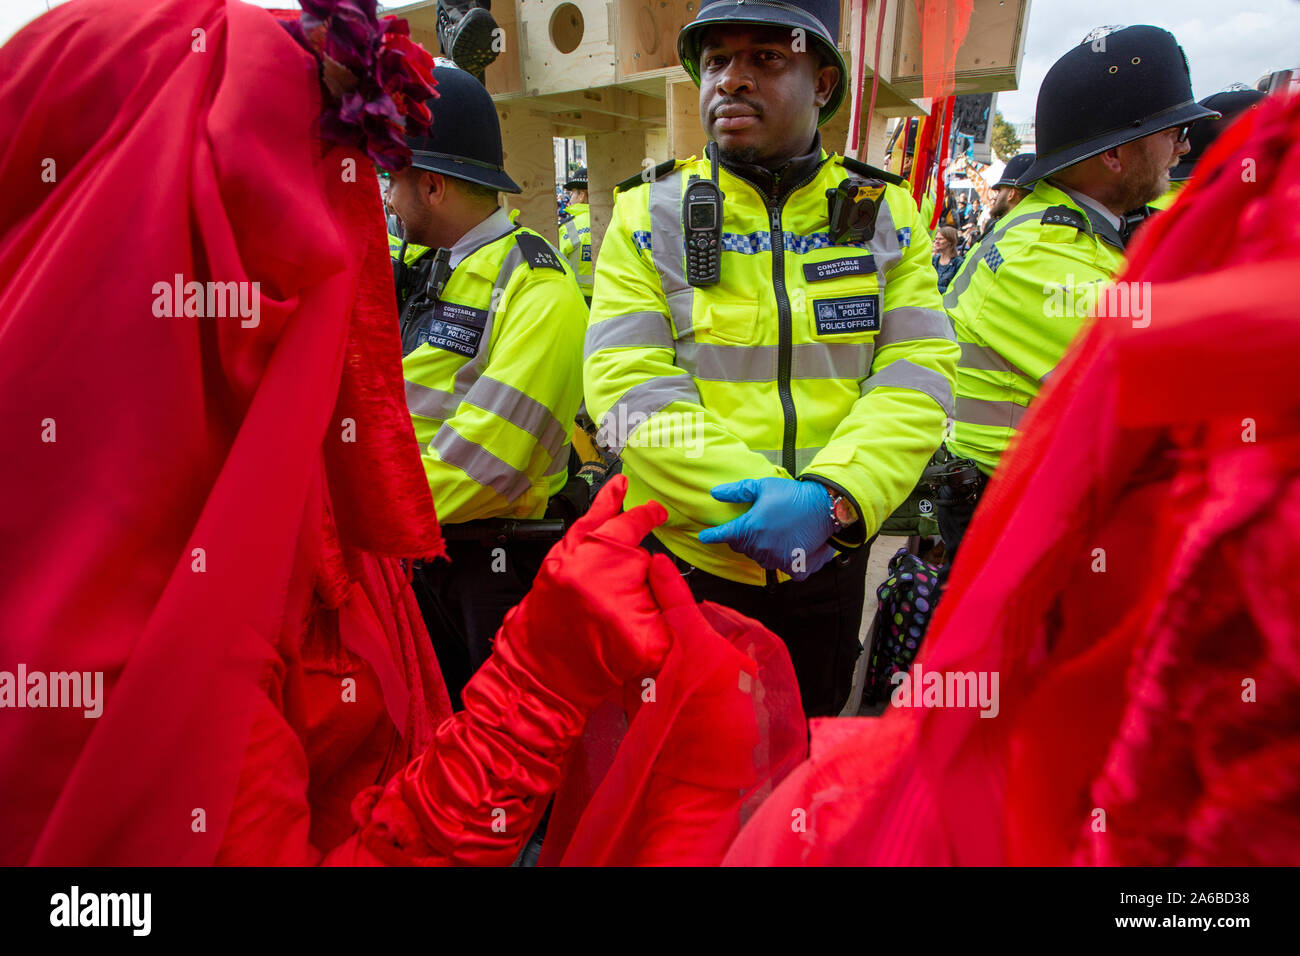 London, 10th October 2019, Extinction Rebellion  group in red costumes surround police preparing to arrest  acivists who have locked themselves to a wooden structure in the road beside Trafalgar Square. Stock Photo